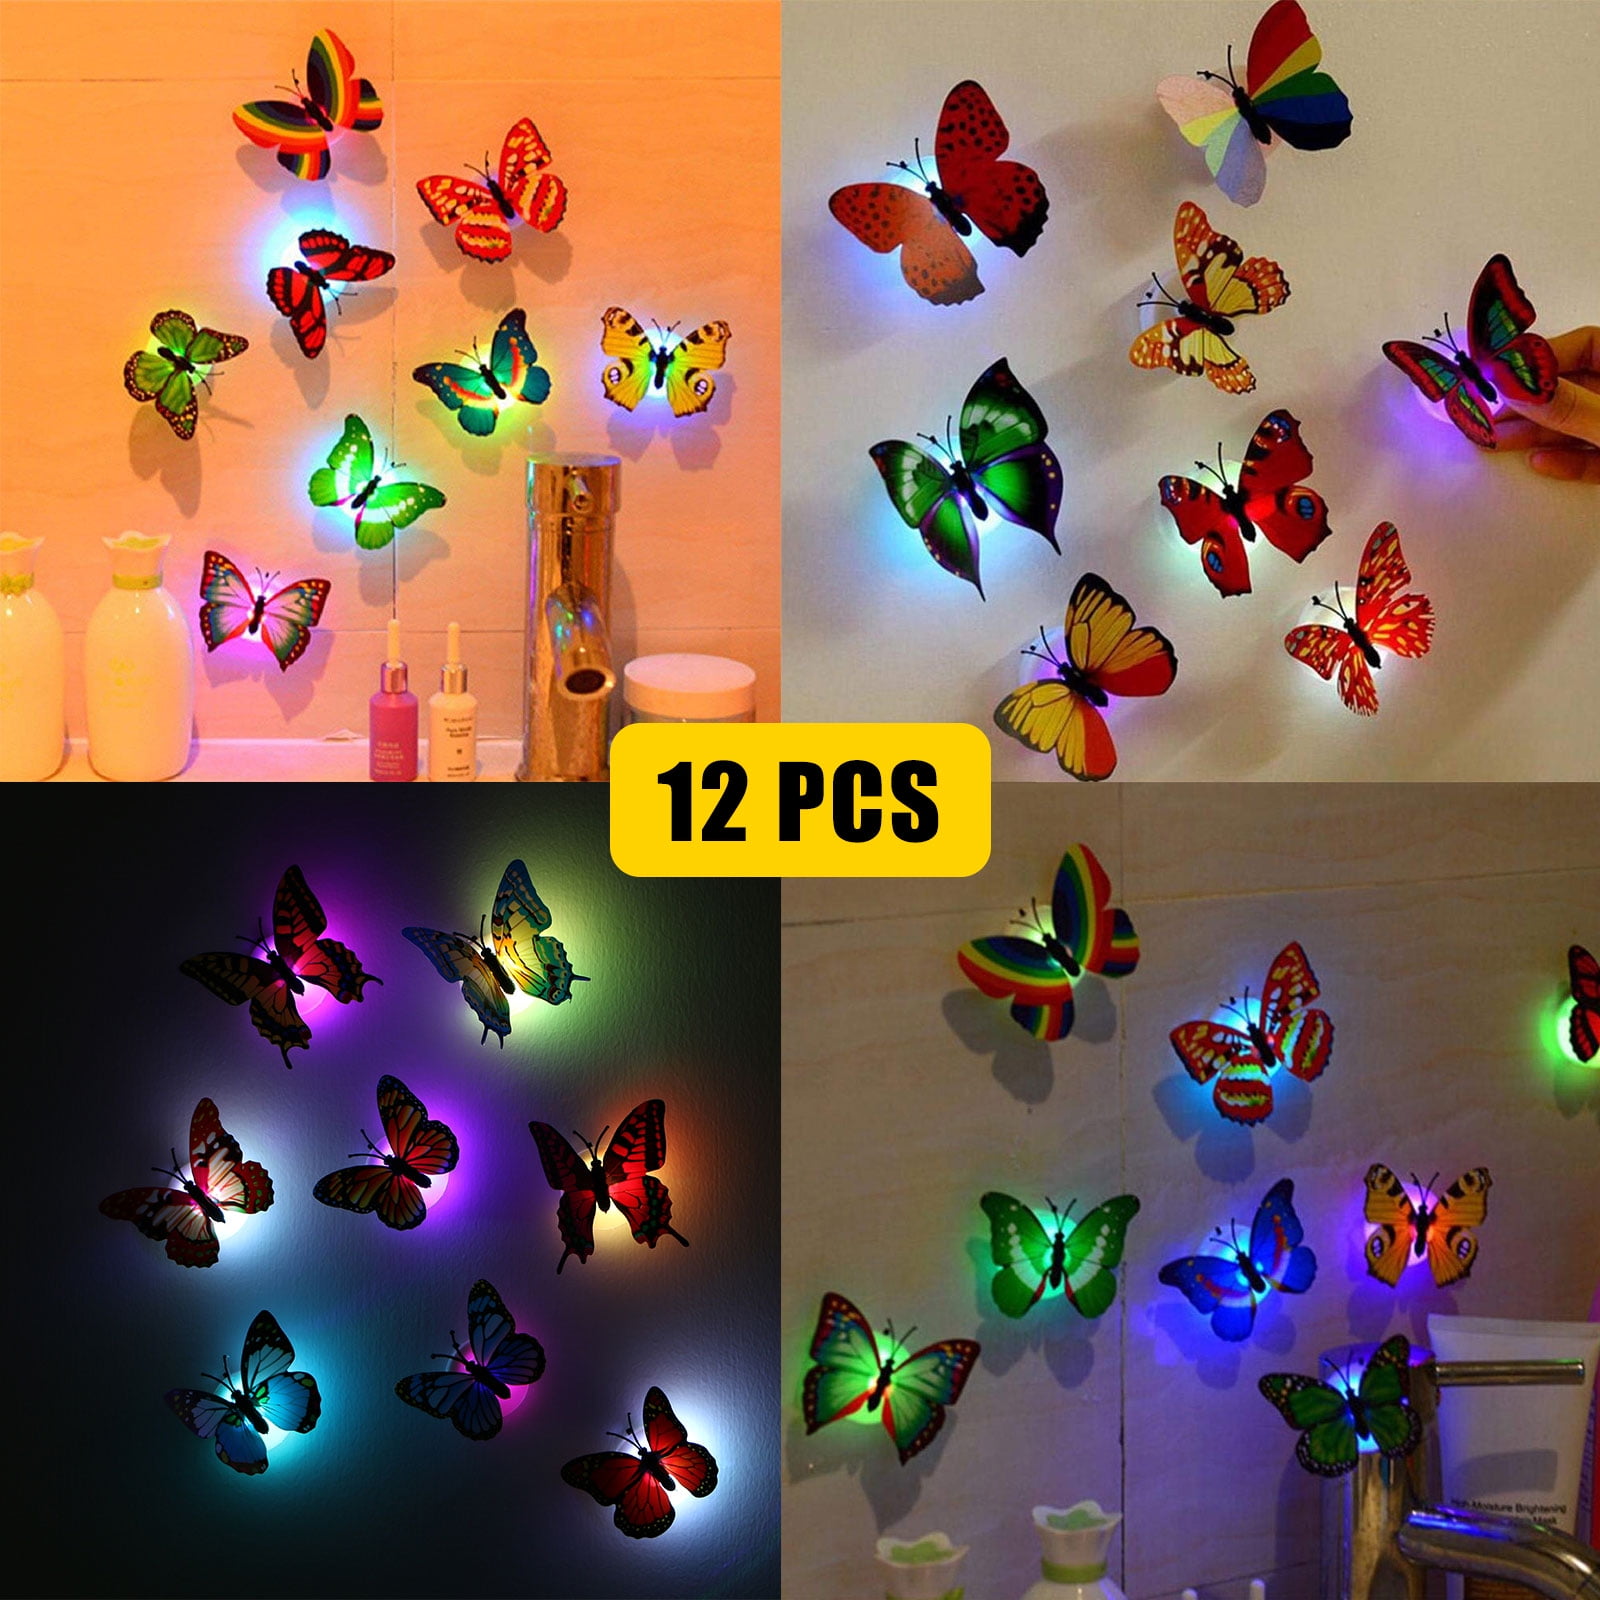 Butterfly Vinyl Stickers Set of 35 Butterflies for Laptops Walls Kids Stickers Beds Bedrooms Scooters